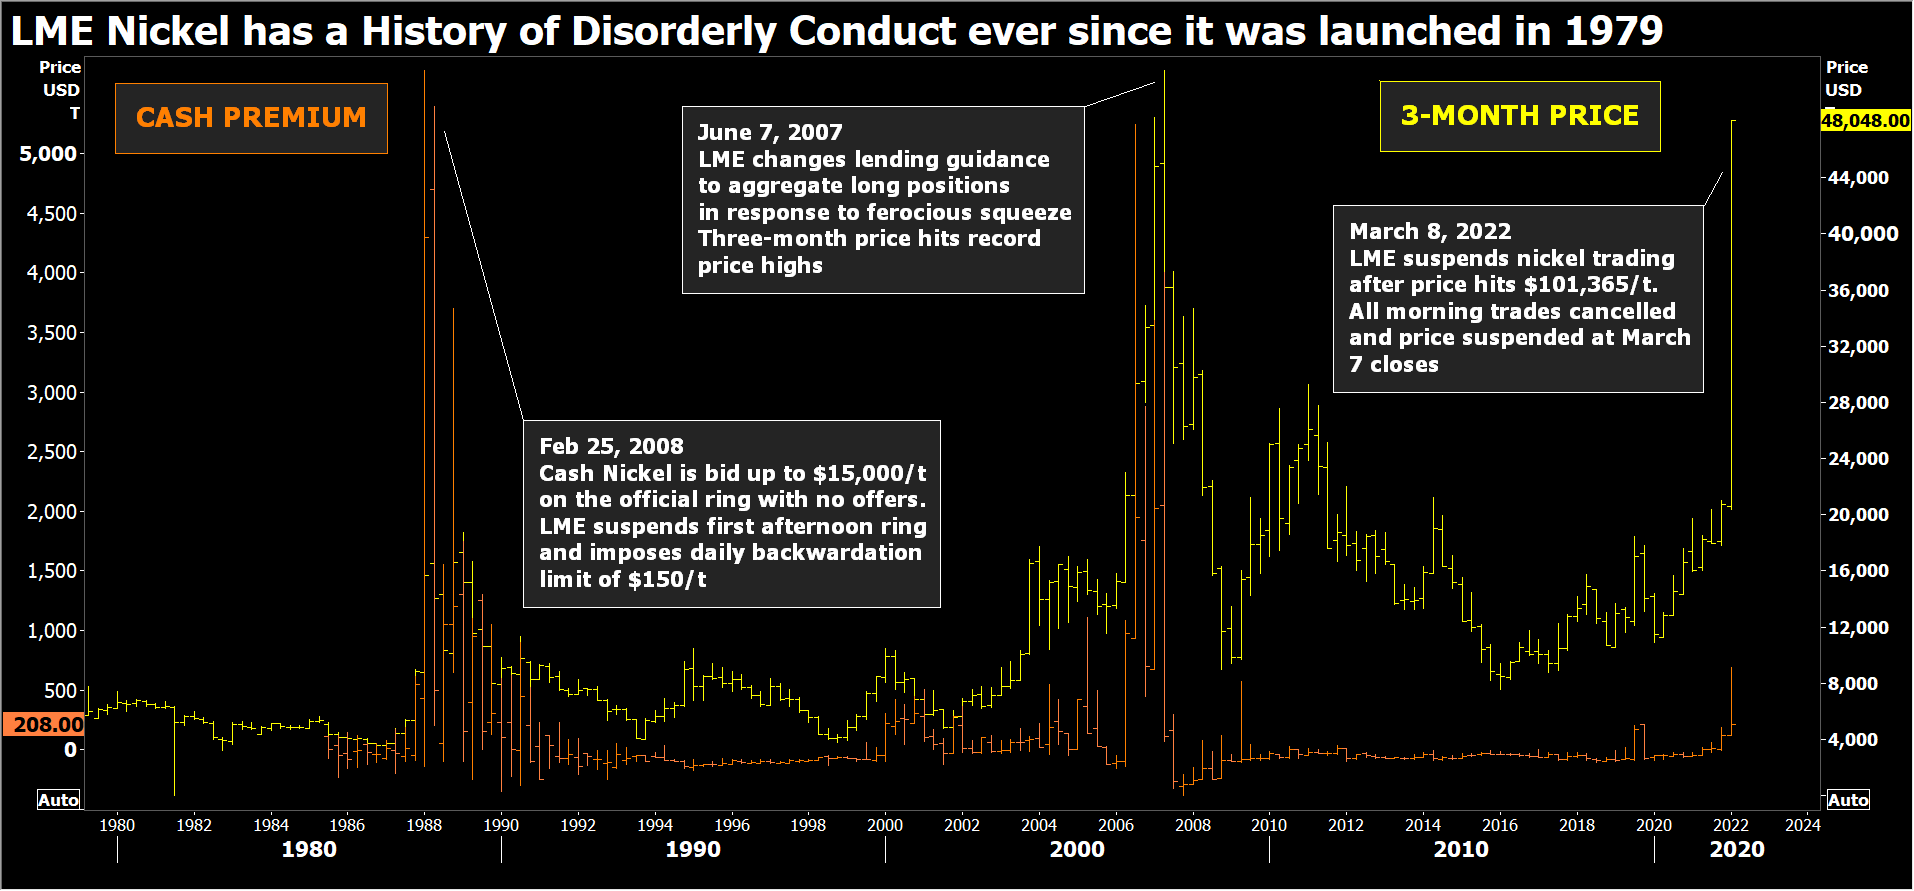 LME nickel has a history of disorderly conduct